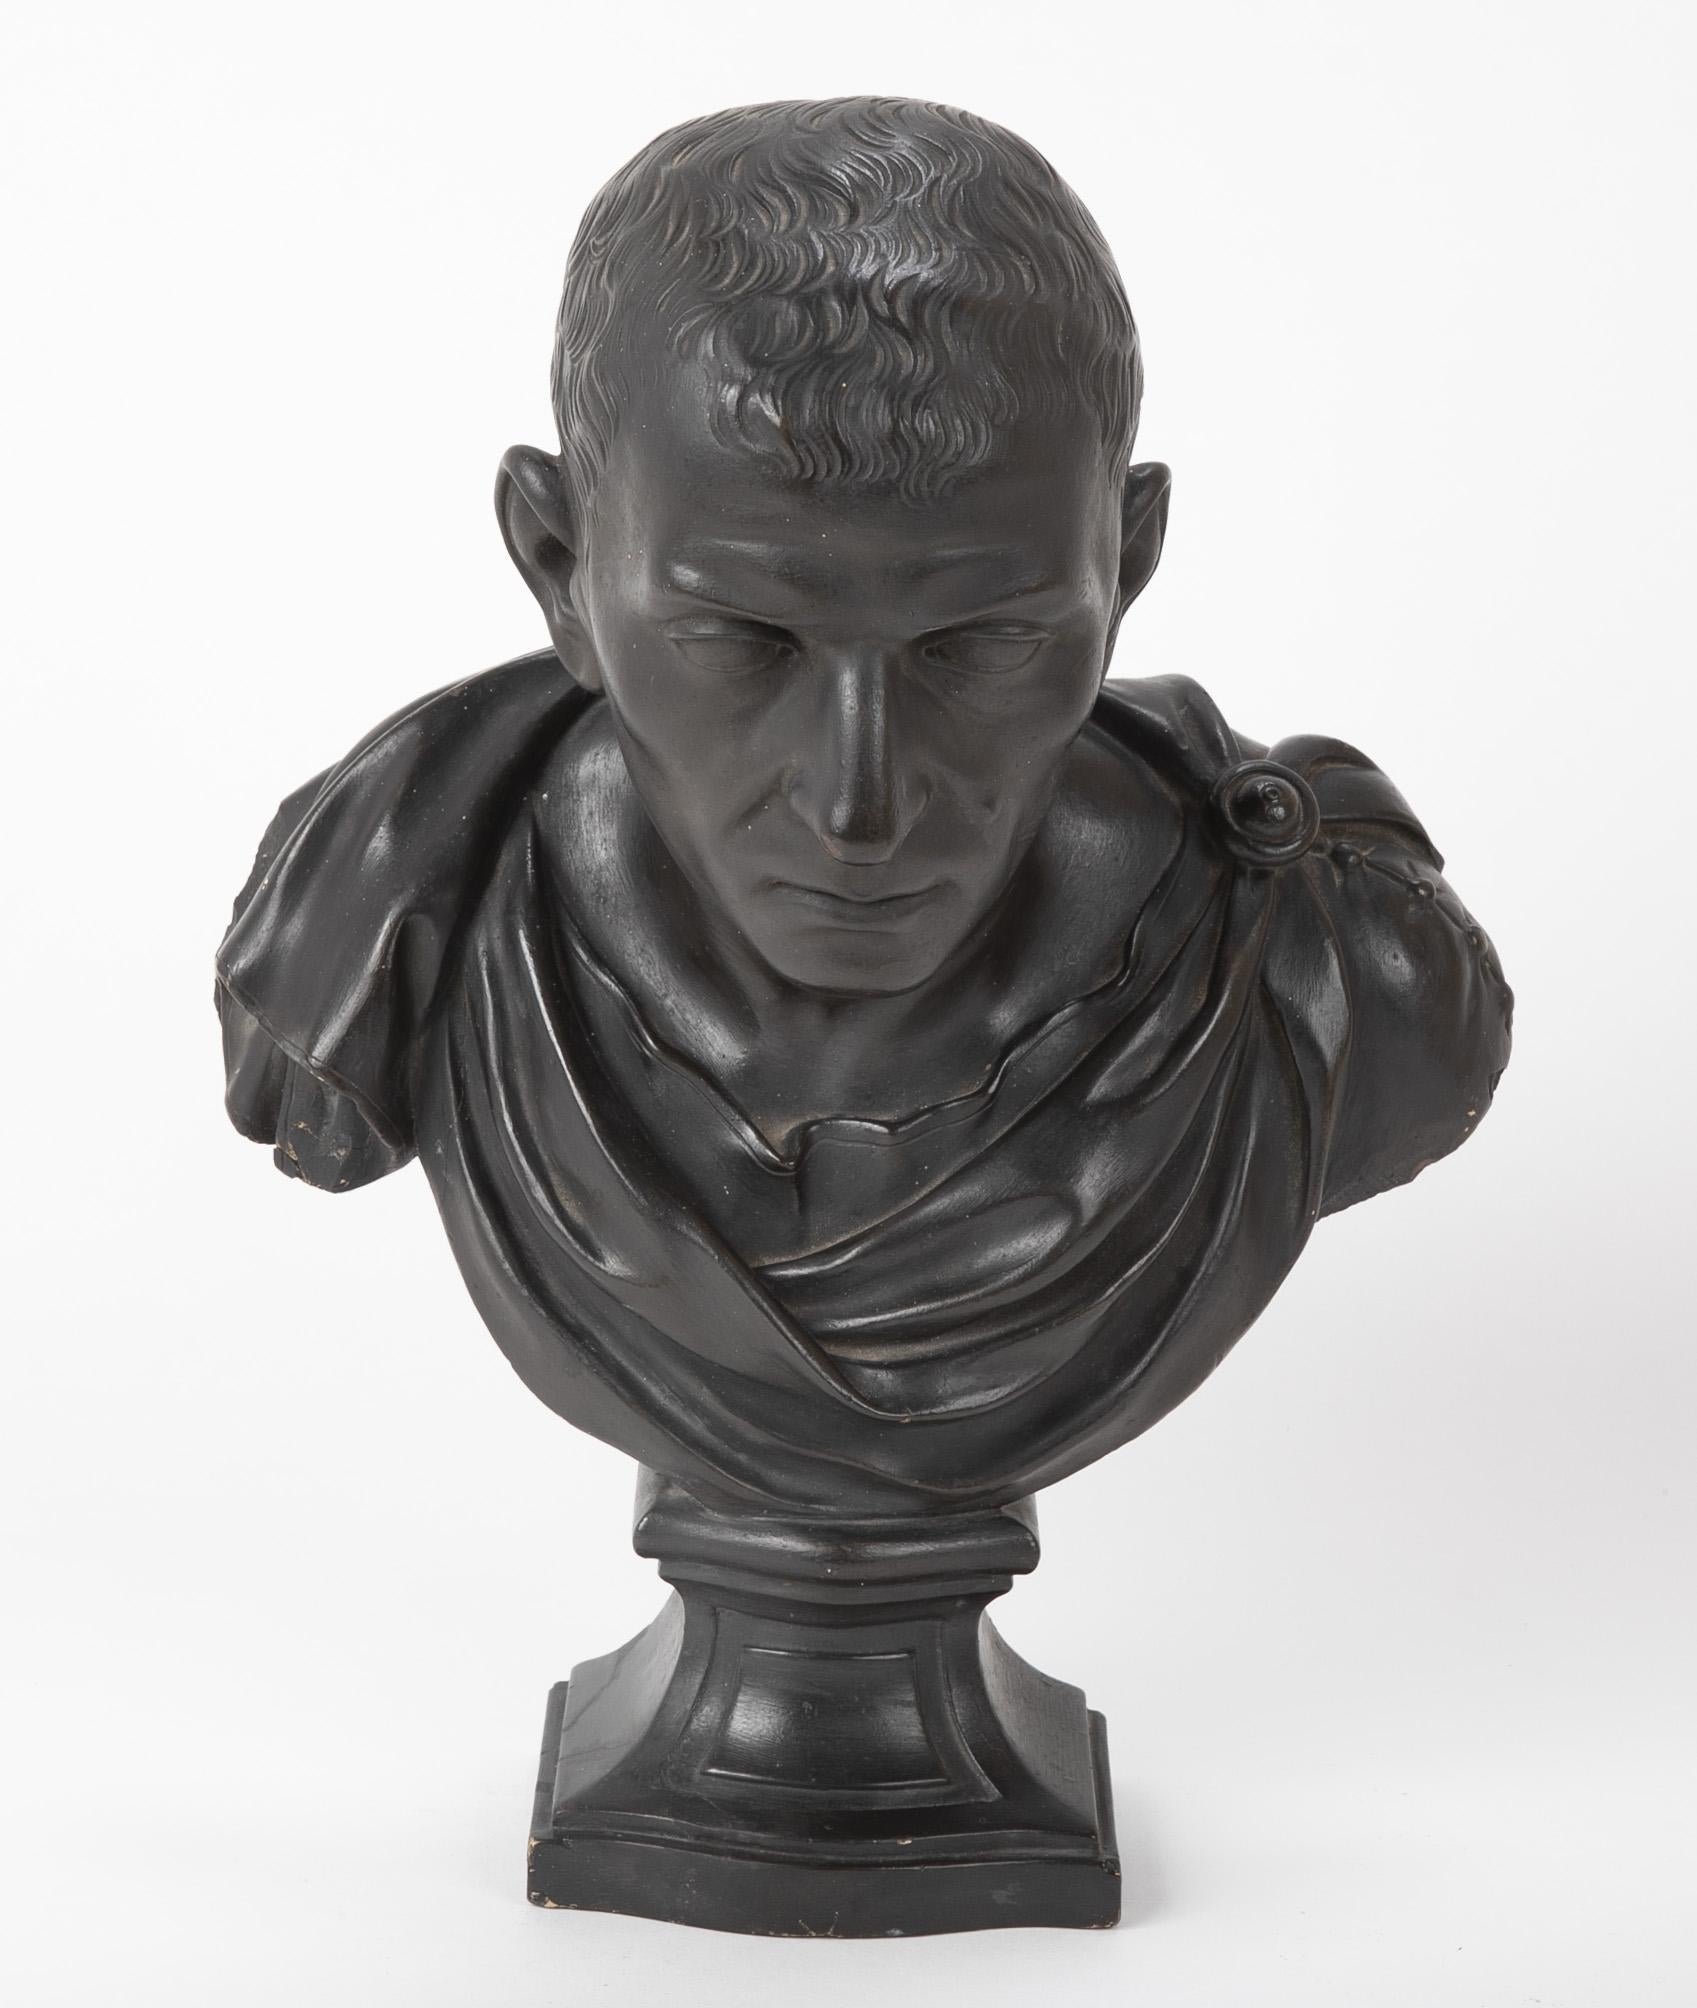 A Bust of Marcus Tulles Cicero, Roman Consul in 63 B.C. completed in ebonized plaster, circa 1880.

Marcus Tullius Cicero was a Roman statesman, orator, lawyer and philosopher, who served as consul in the year 63 BC. He came from a wealthy